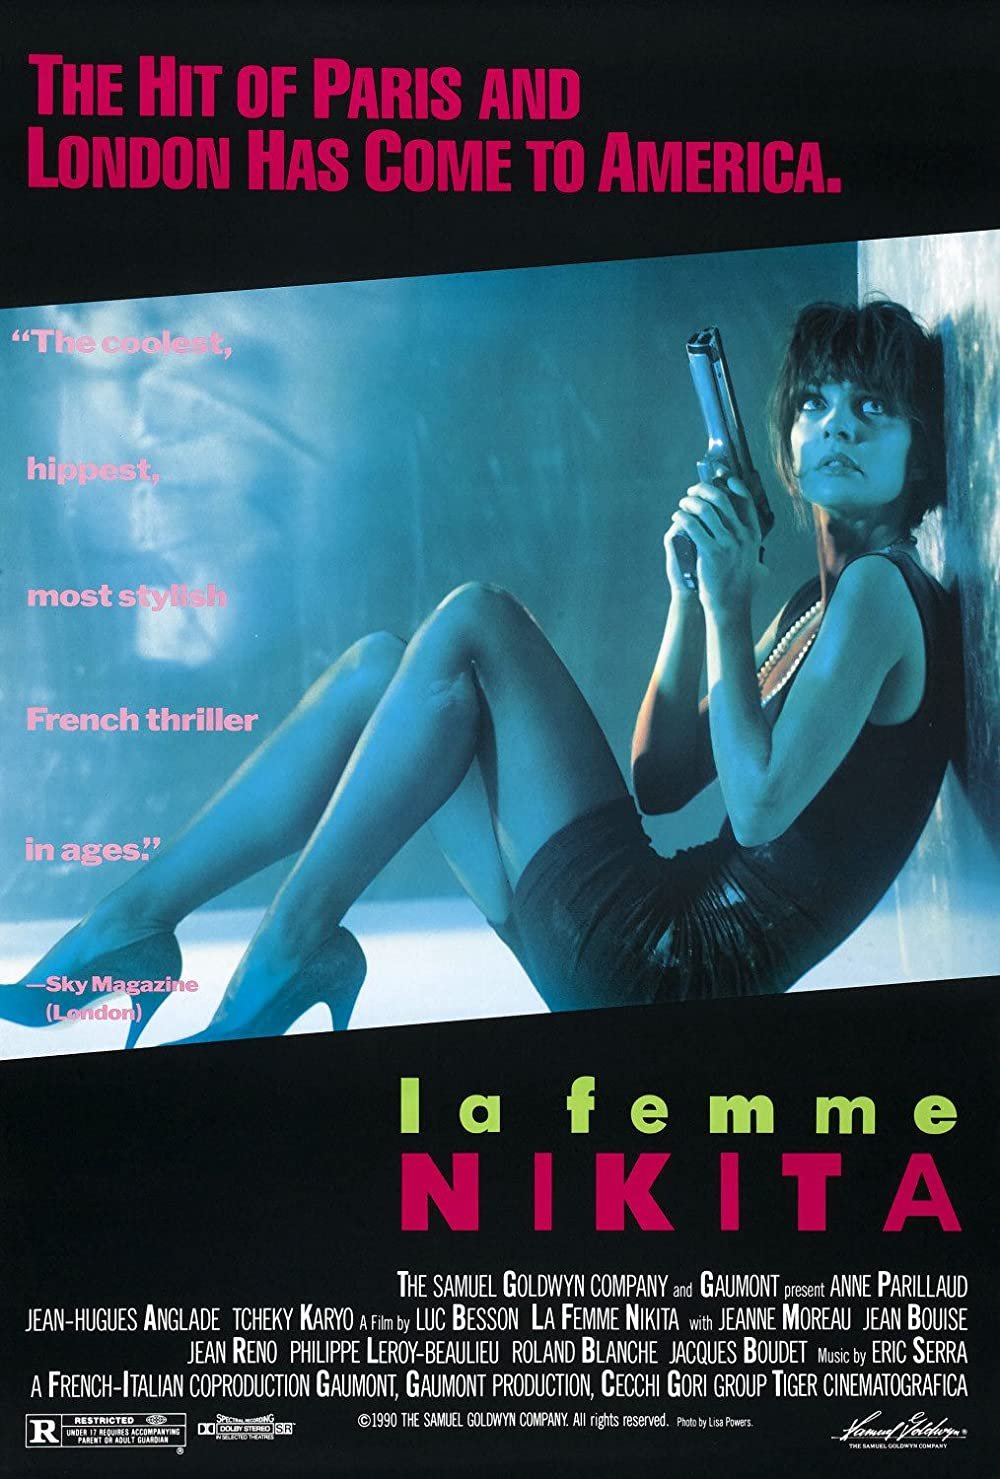 “Nikita”: A Captivating French Thriller That Explores Themes of Redemption and Empowerment